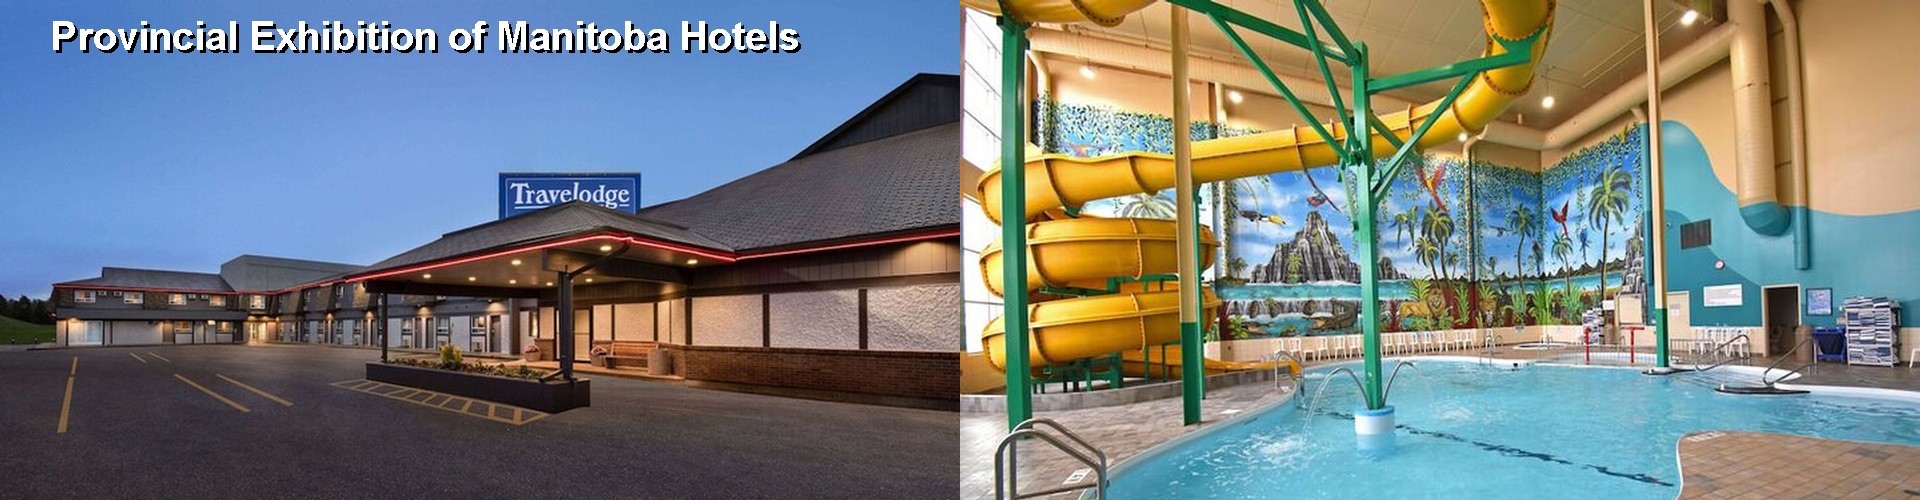 5 Best Hotels near Provincial Exhibition of Manitoba